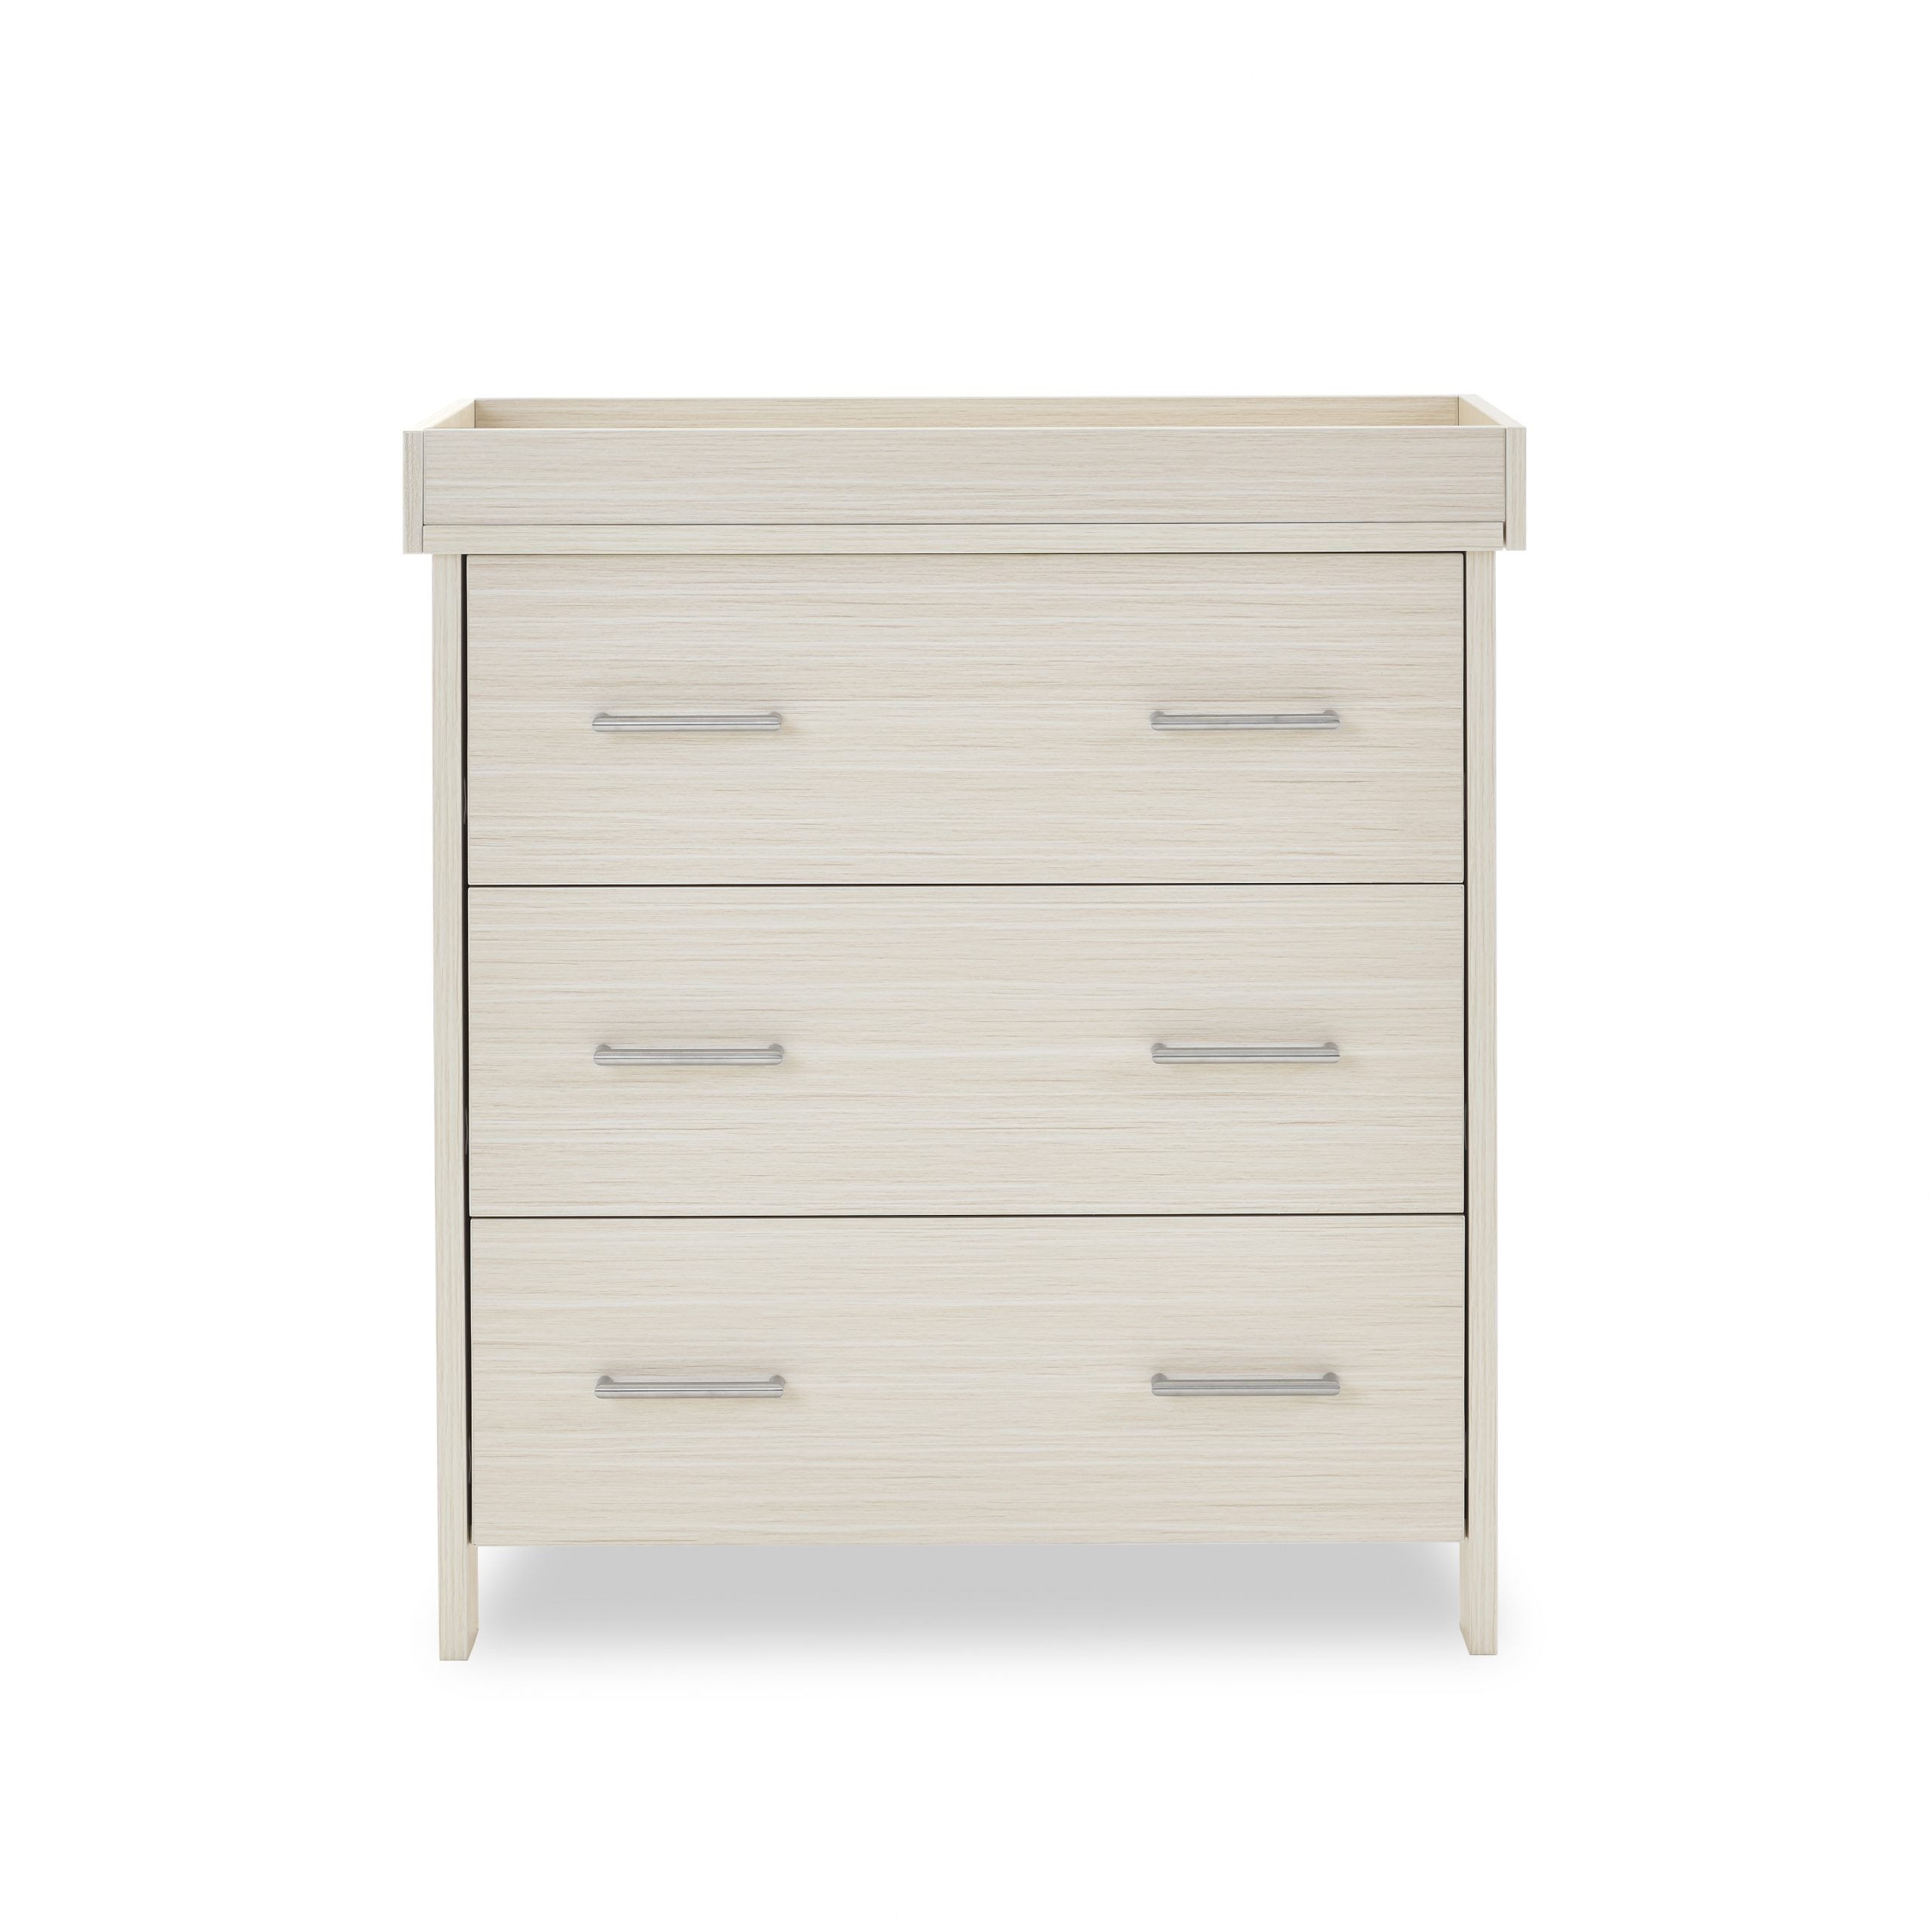 Obaby Nika Closed Changing Unit - Oatmeal